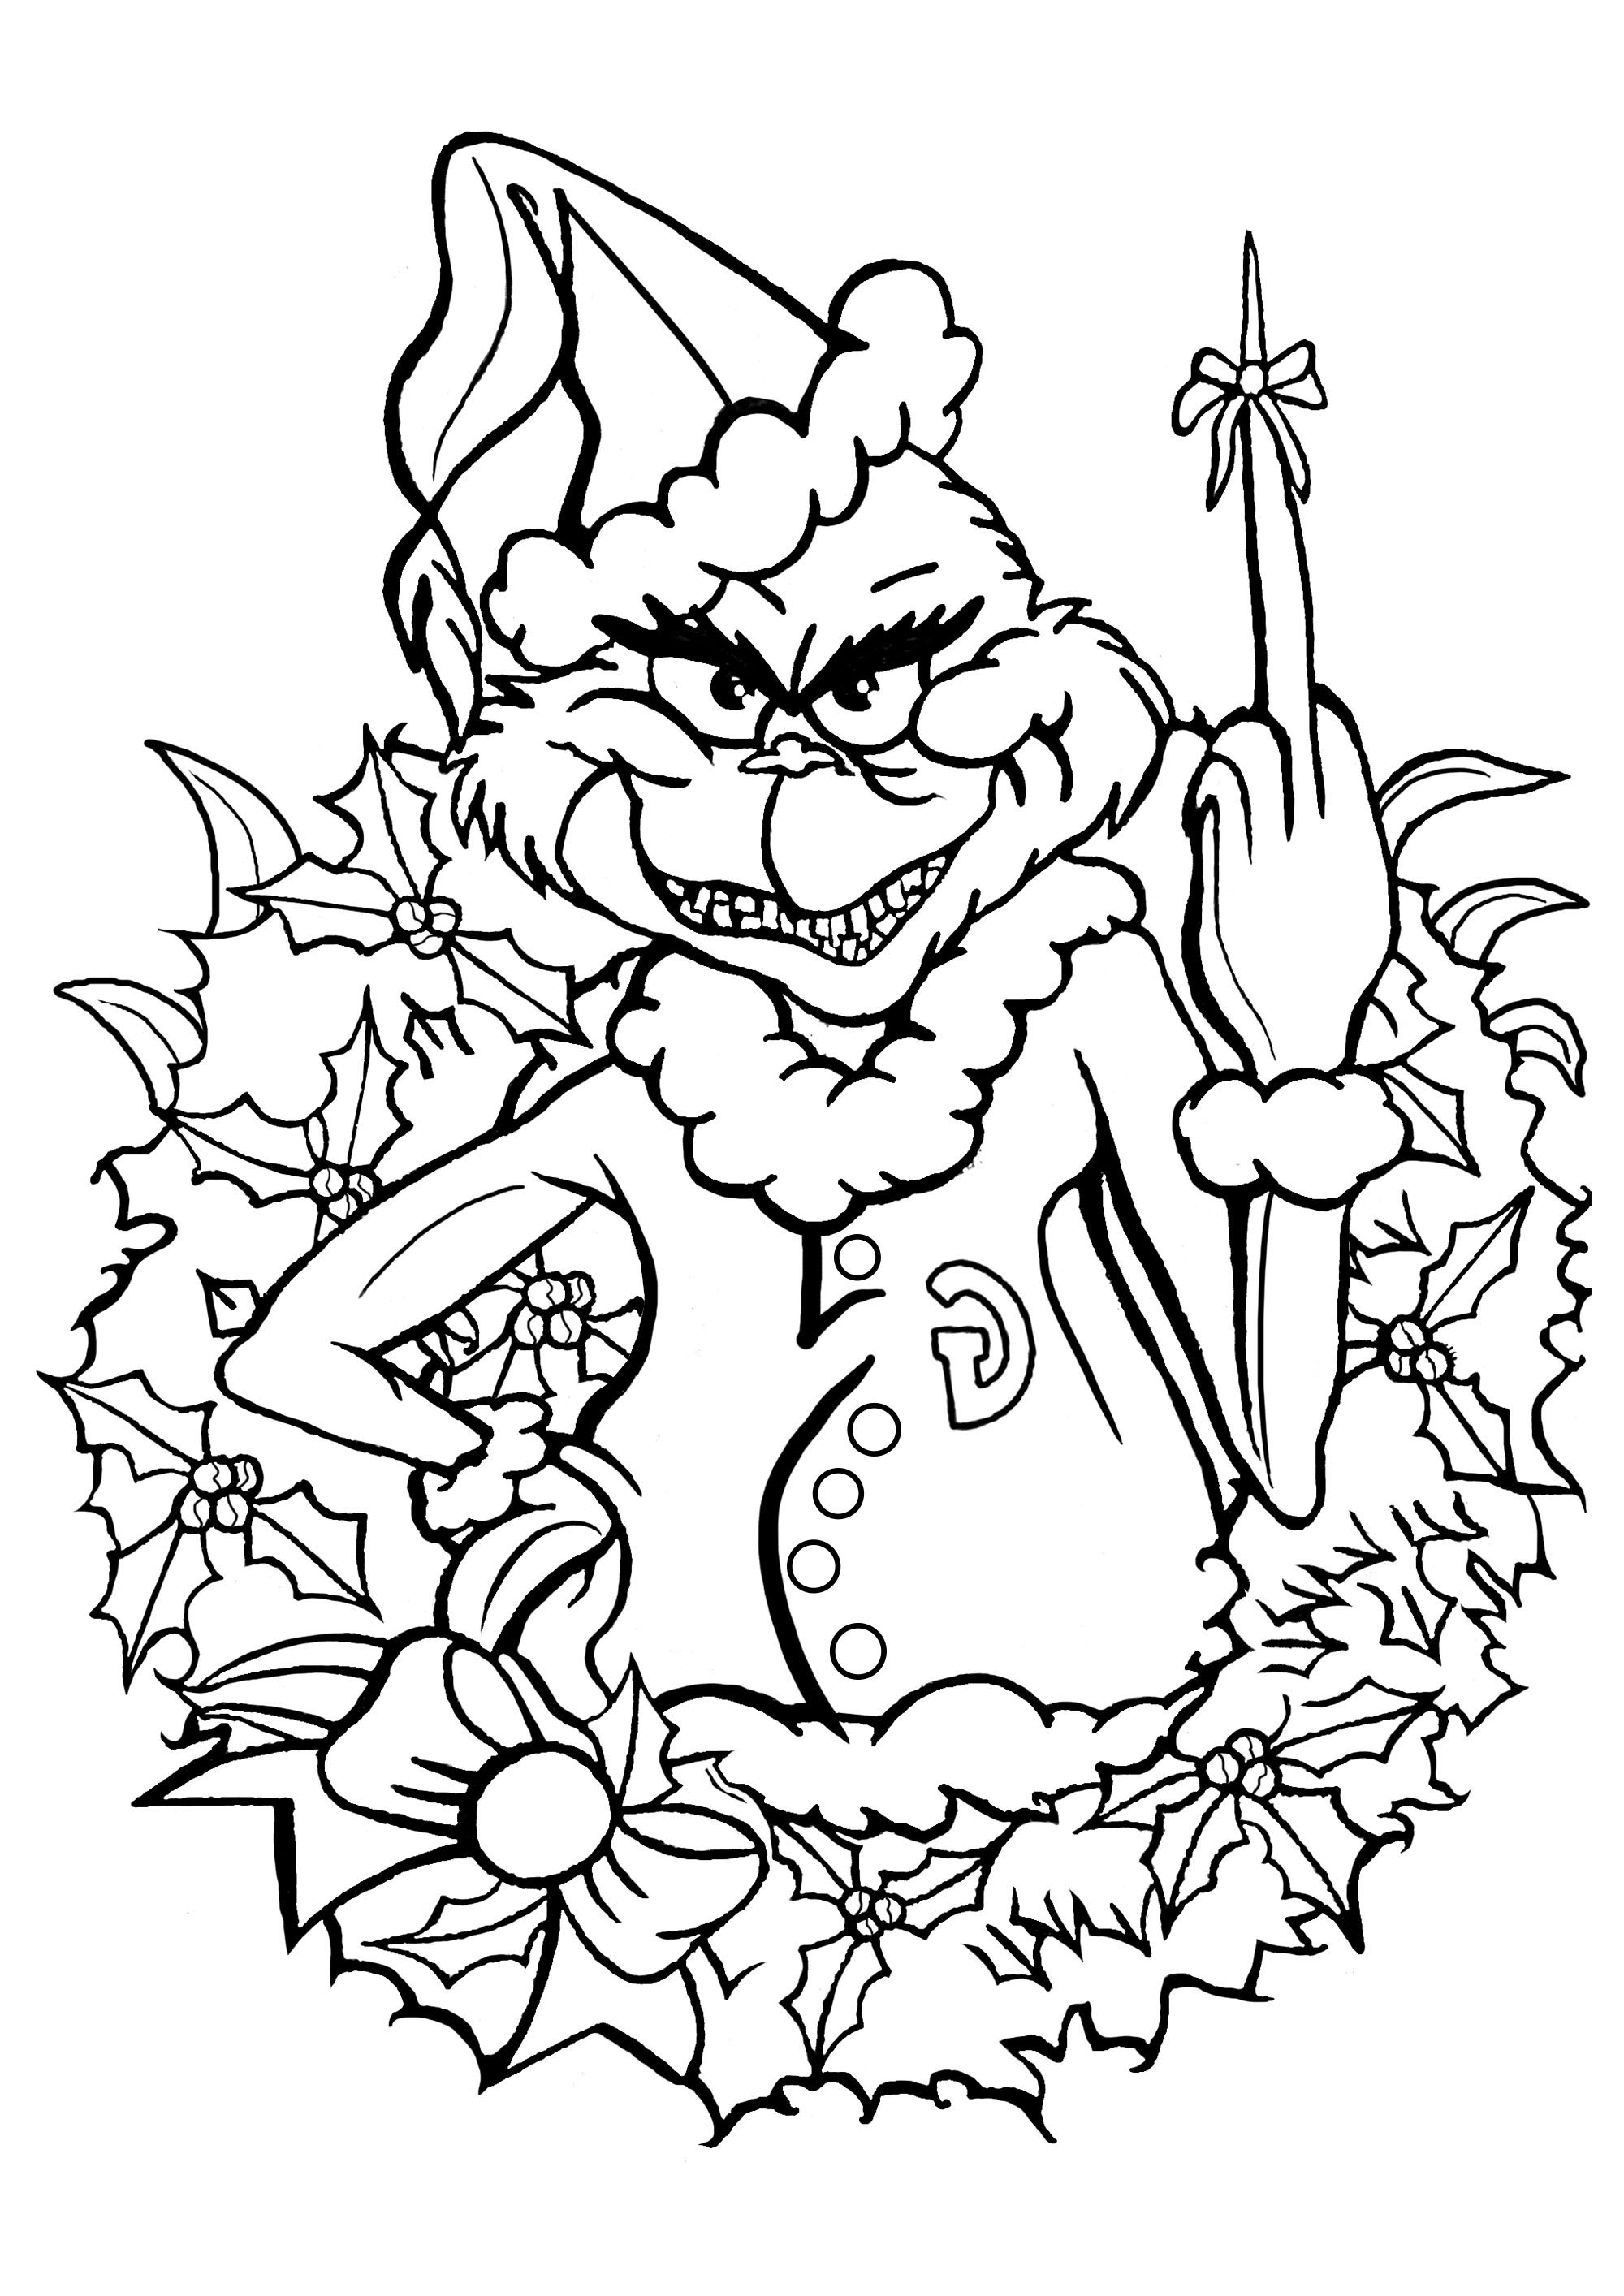 32 Grinch Coloring Pages Printable : Just Kids